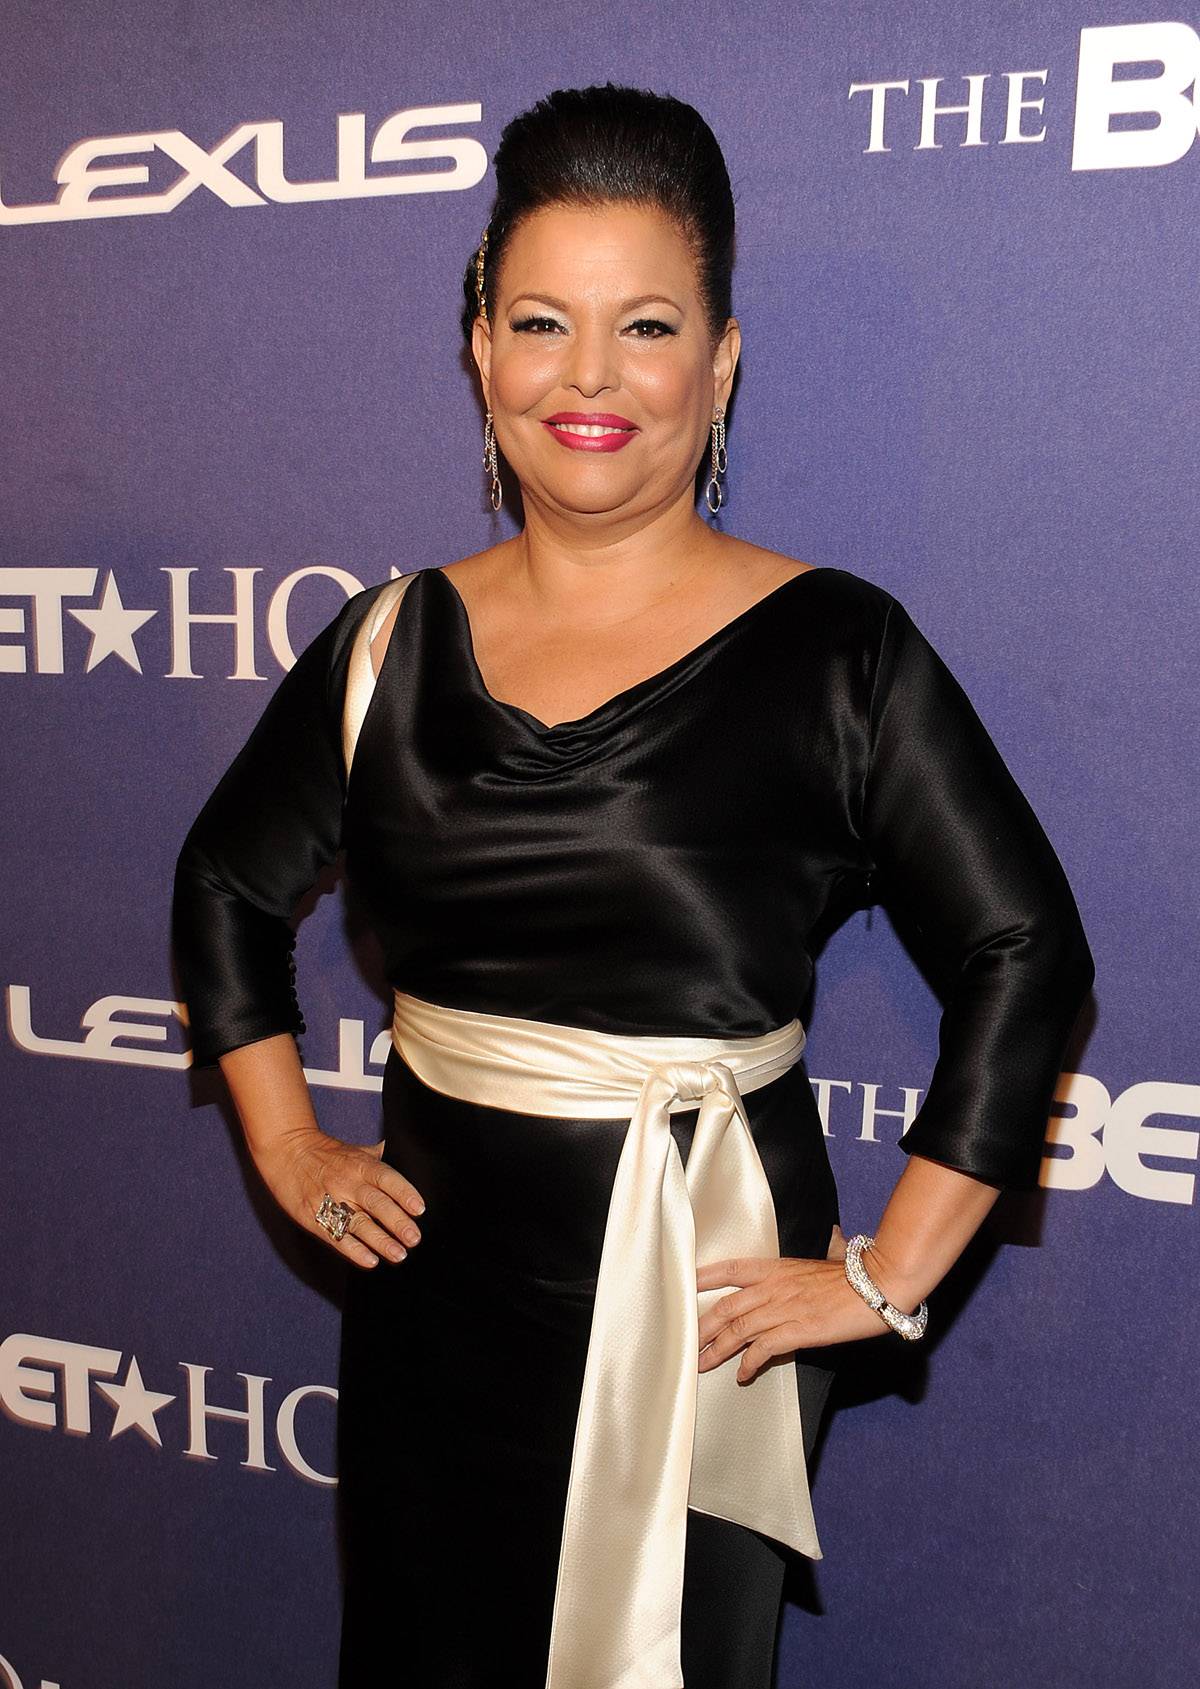 Top Leaders Gather for BET's Leading Women Defined Conference News BET